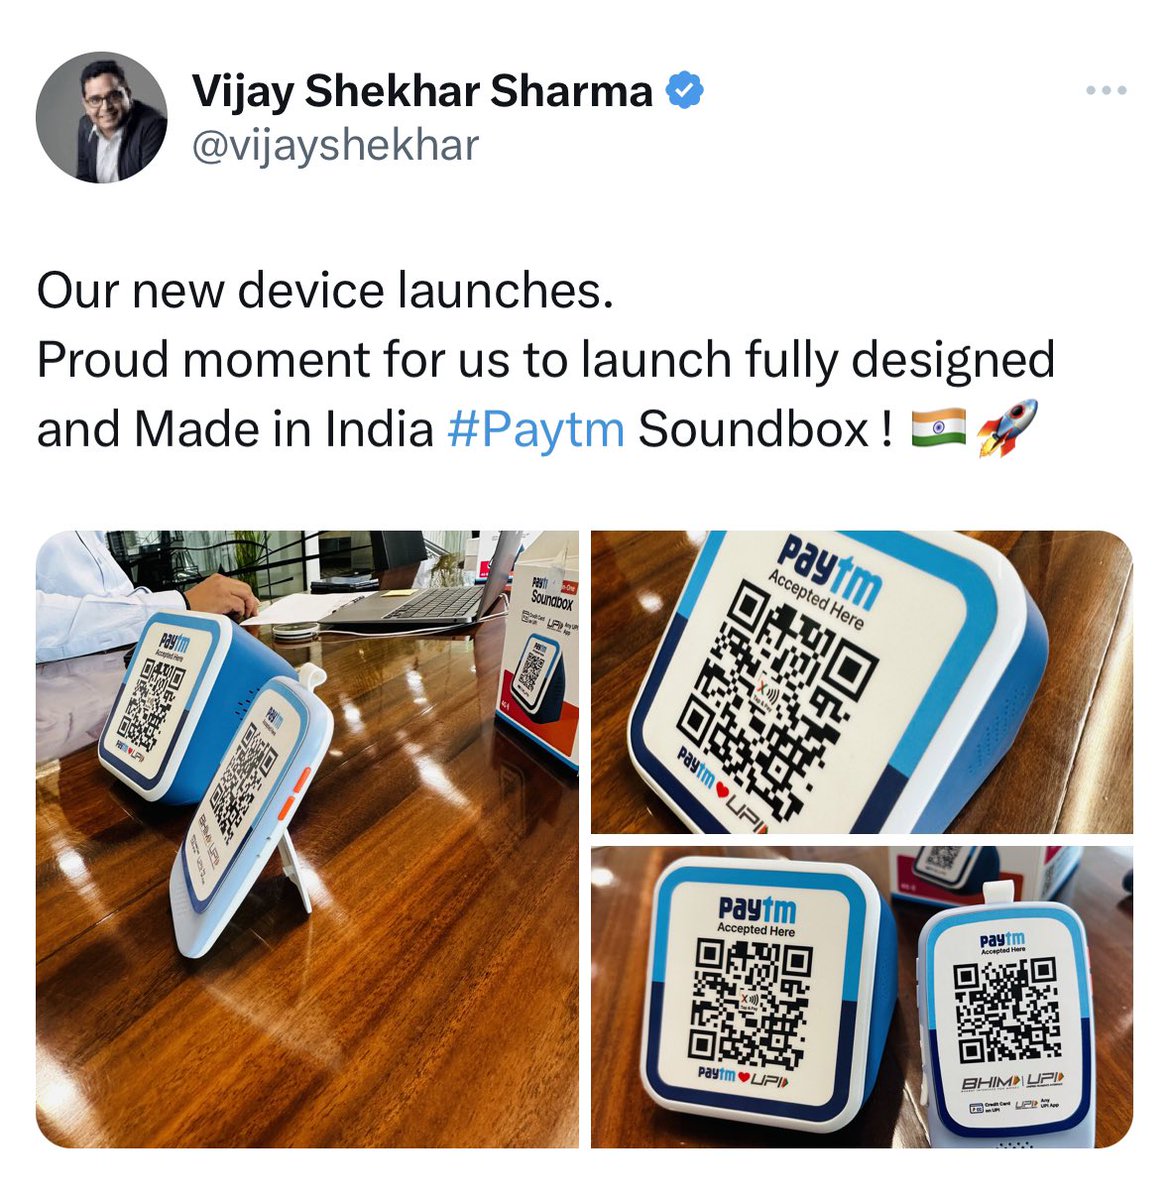 Ai has completely changed the Tech industry of the world! 

Meanwhile our Startup founders in India still .. 

#Startup #StartupIndia #paytm #investment #Indiannedsinnovation